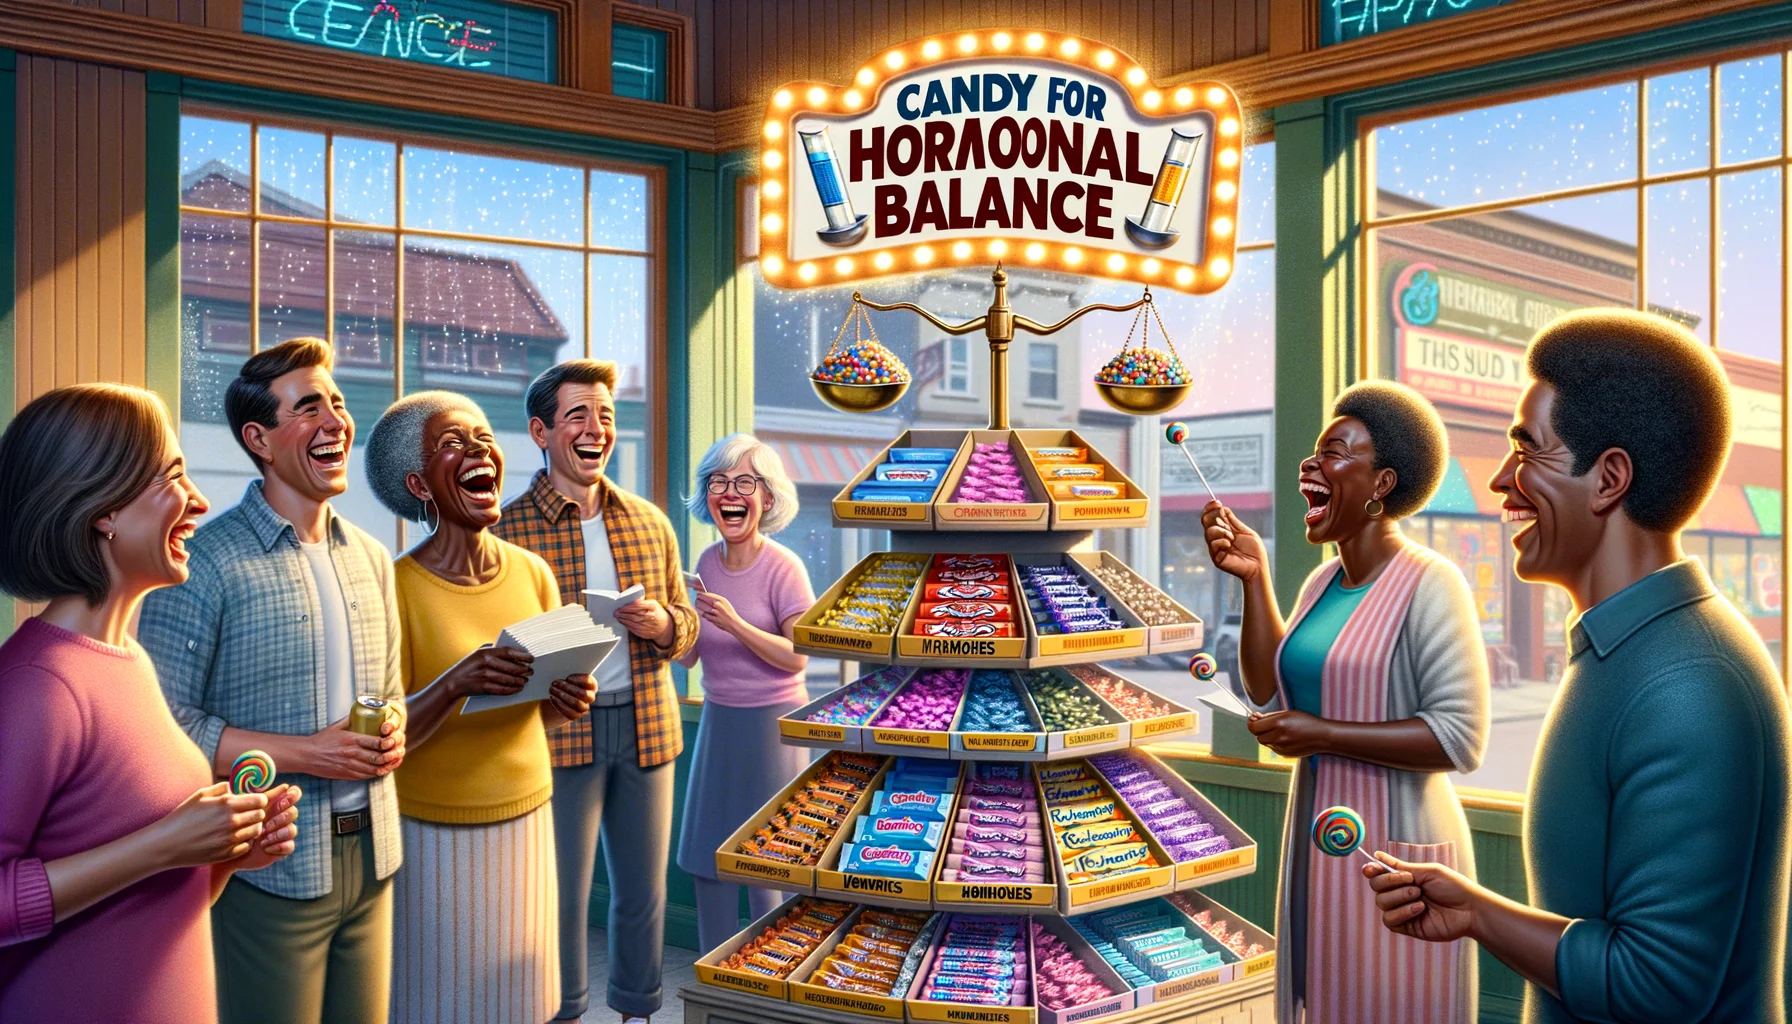 A humorous and highly detailed realistic scenario of a small local store. Laughing customers of various ages, genders, and descents are seen happily selecting candies from a tall, glowing display stand labeled in big, bold letters 'Candy for Hormonal Balance'. The candy boxes feature whimsical graphics of hormones around a balance scale indicating equilibrium. The store's light-hearted shopkeeper, a middle-aged Black woman, keeps refilling the choices like it’s her favorite task. Glittering sunshine beams through the window reflecting rainbow colors off the candy wrappers, adding a surreal touch to the scene.